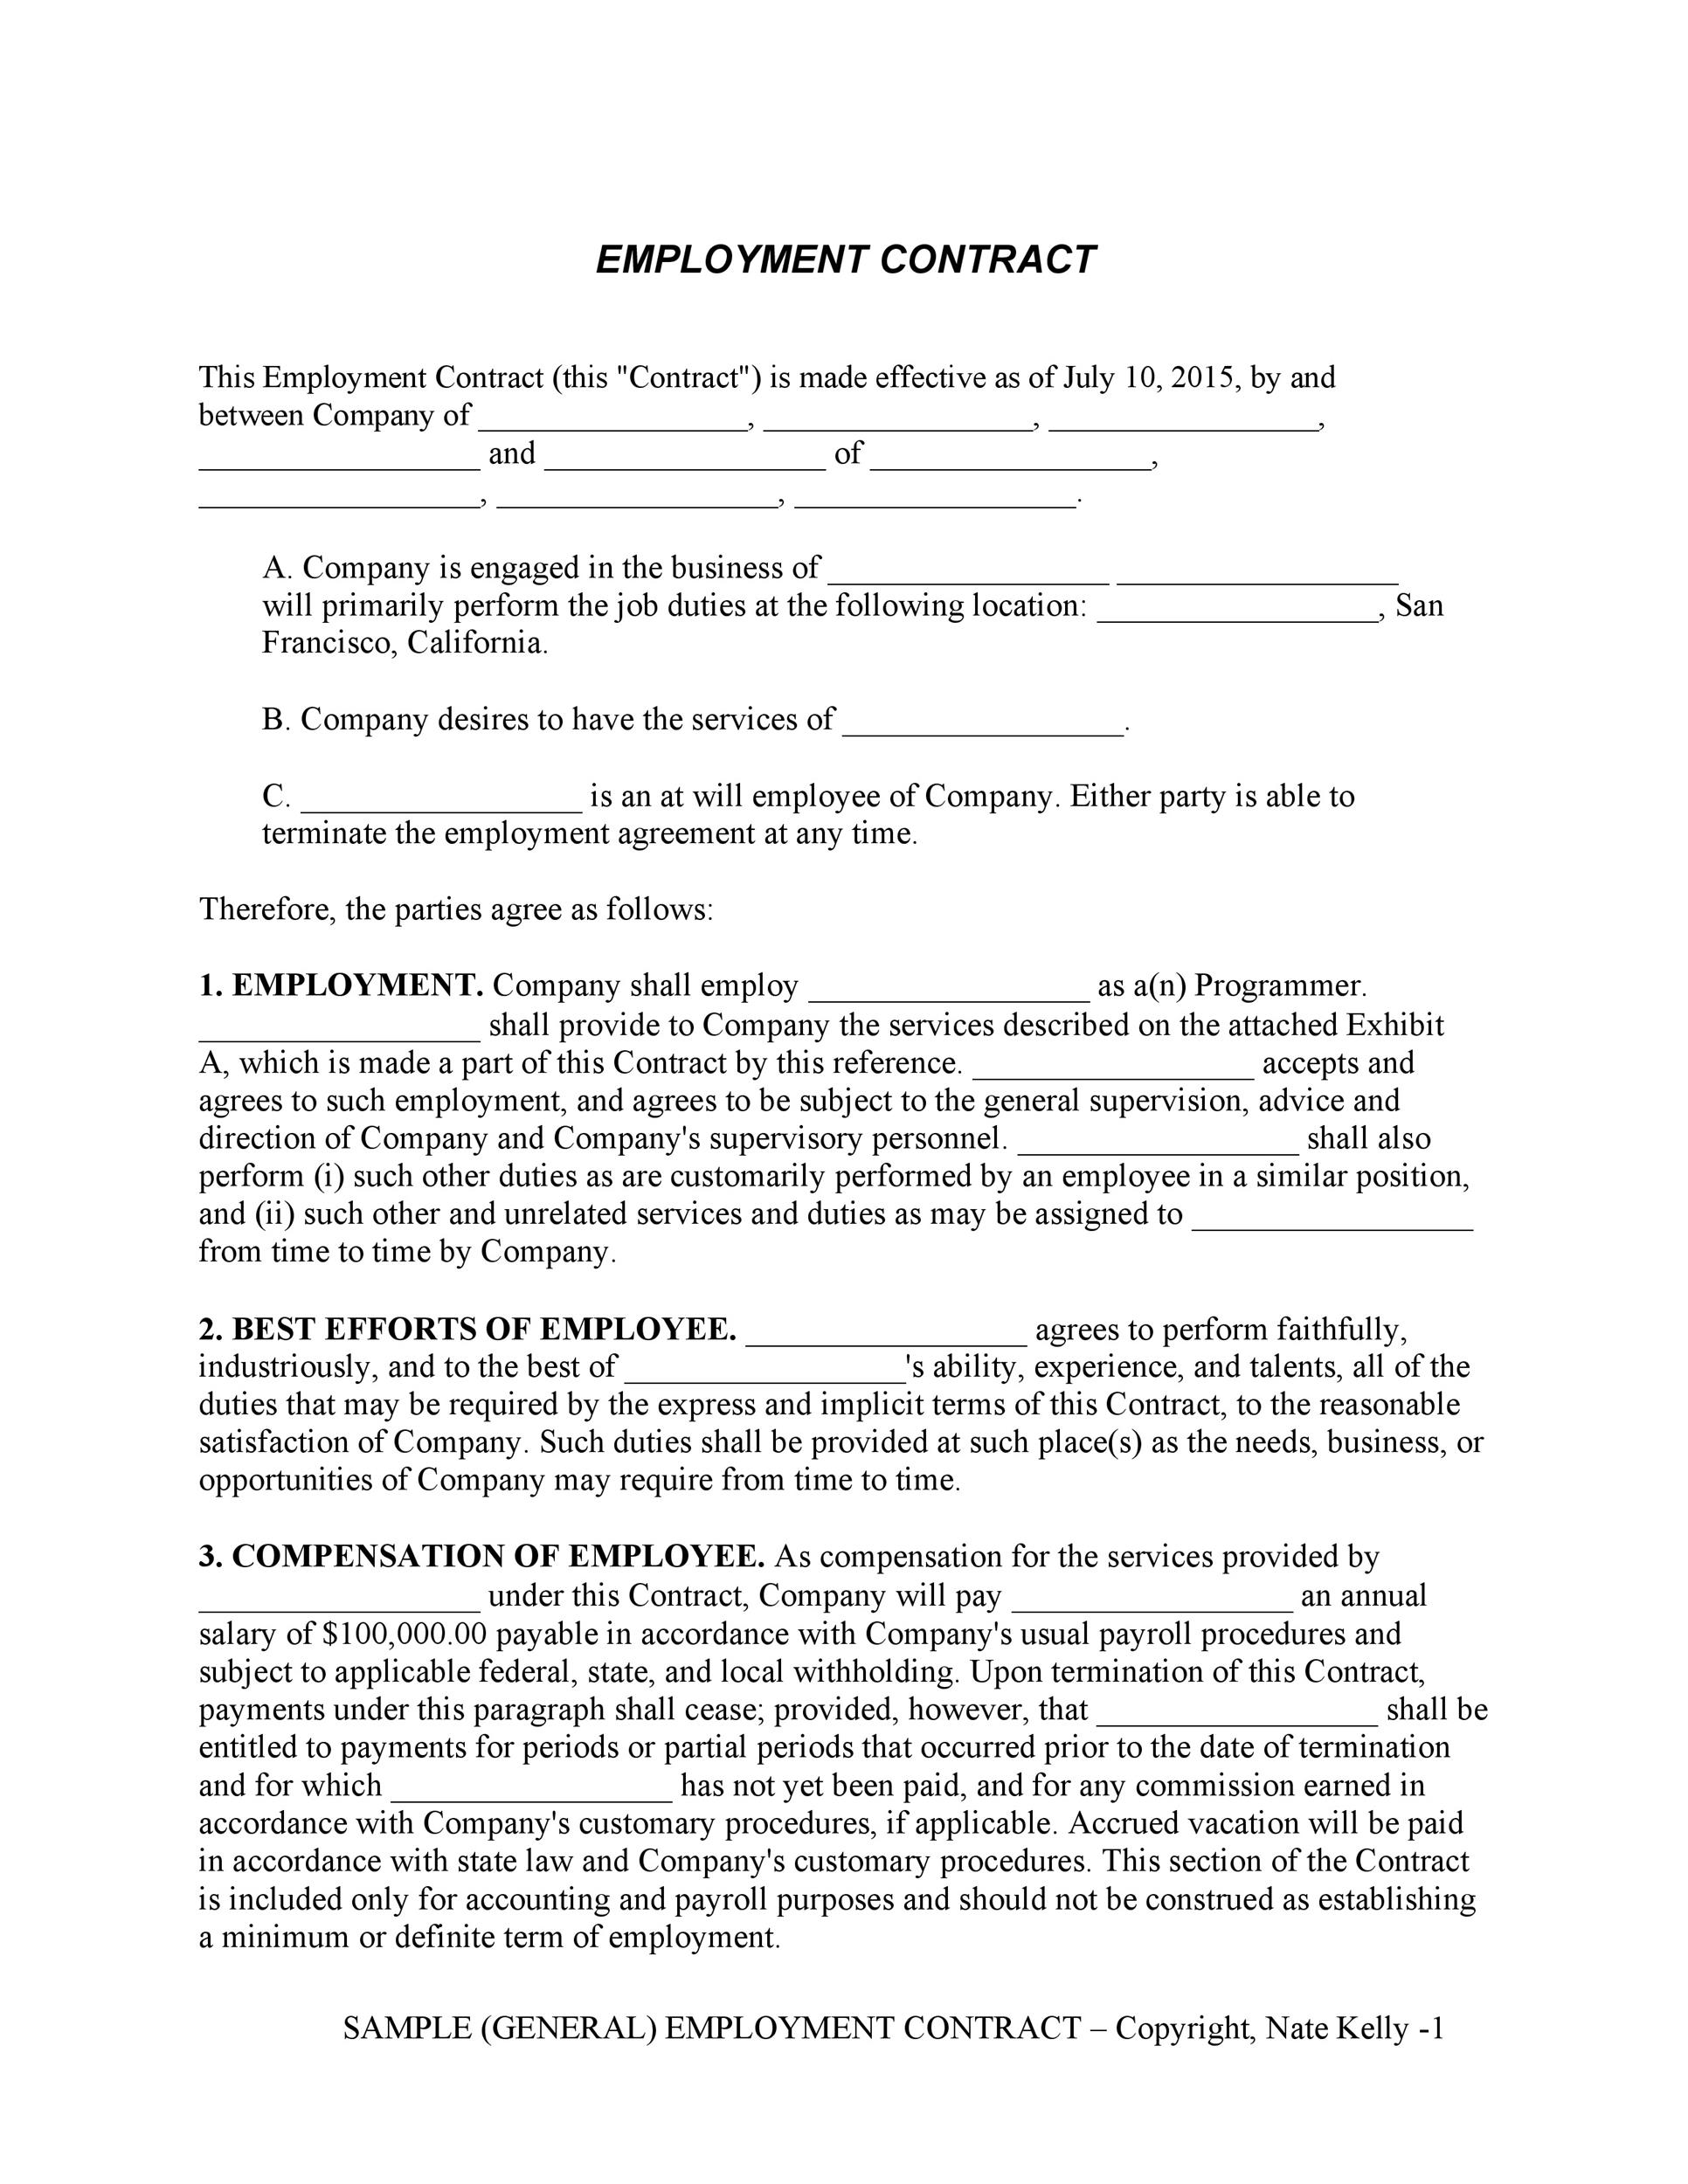 employment-contract-template-new-york